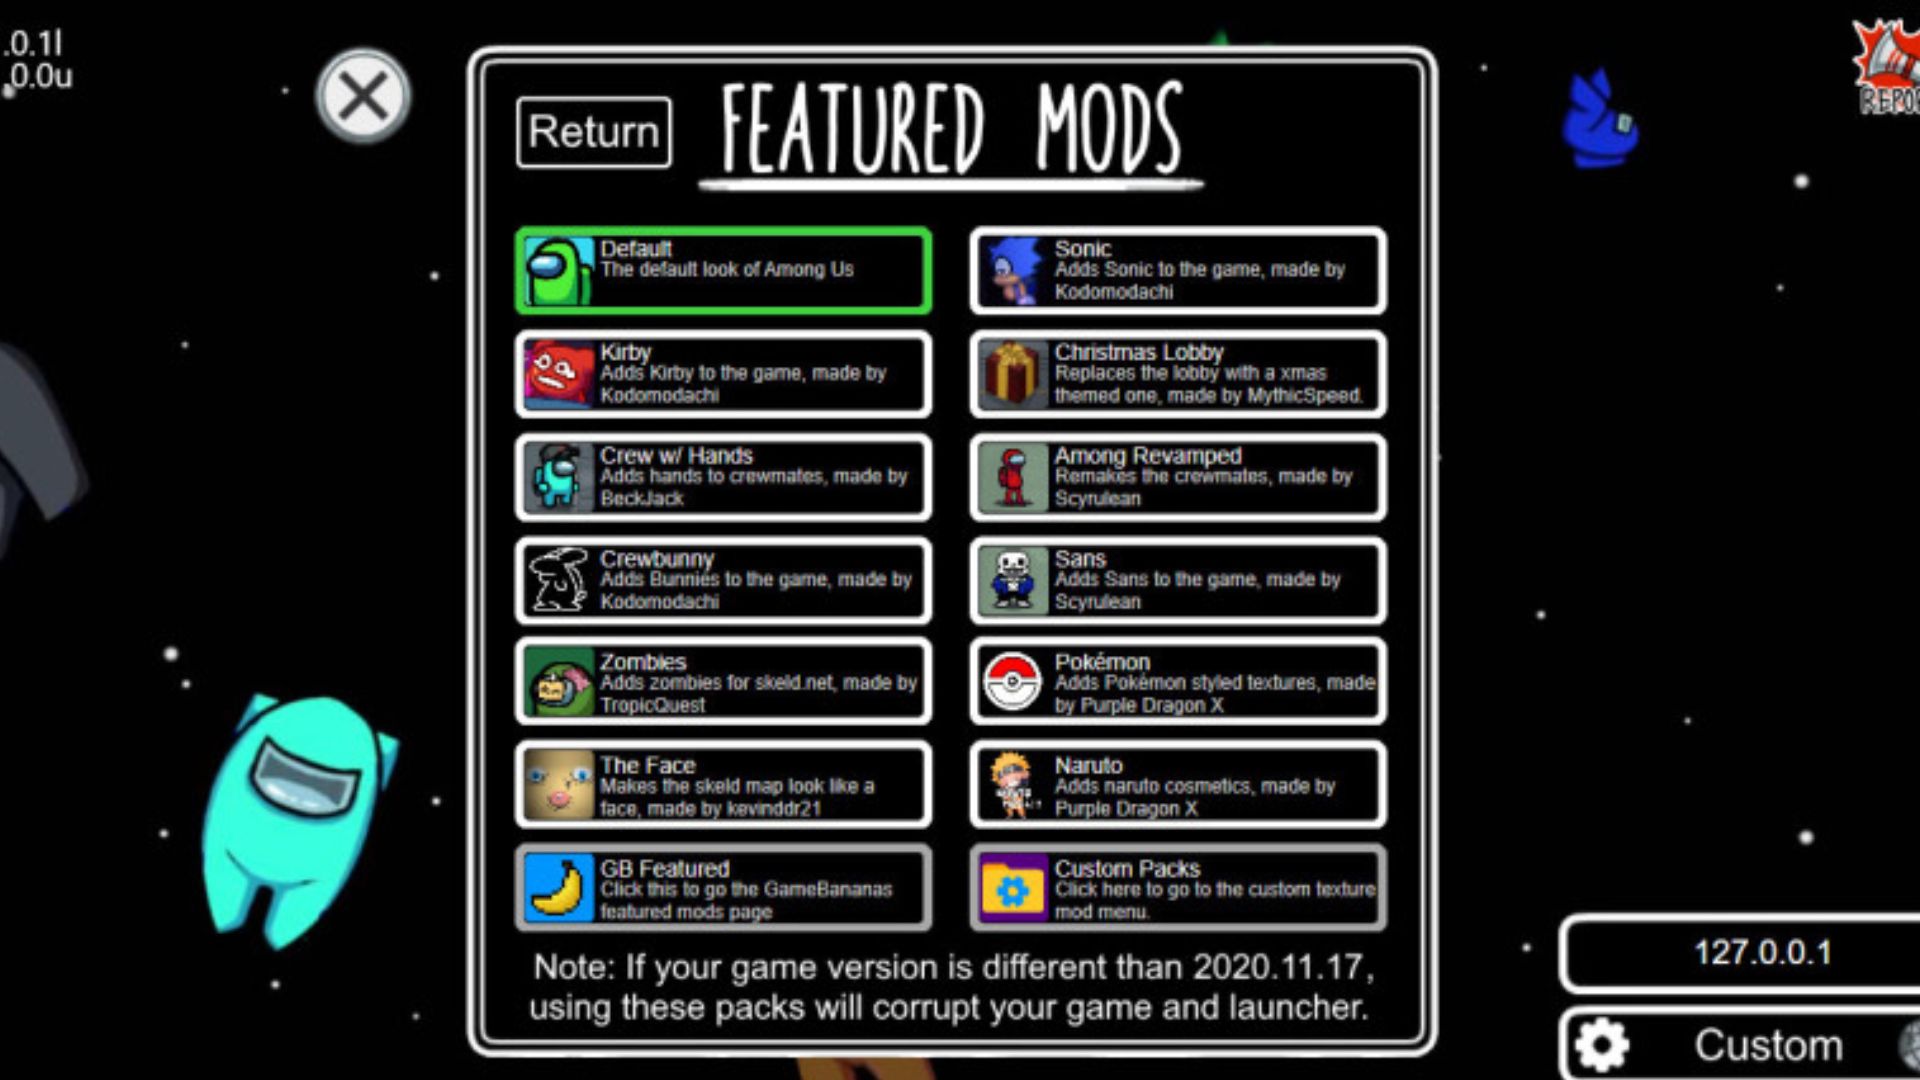 Among Us Featured Mods